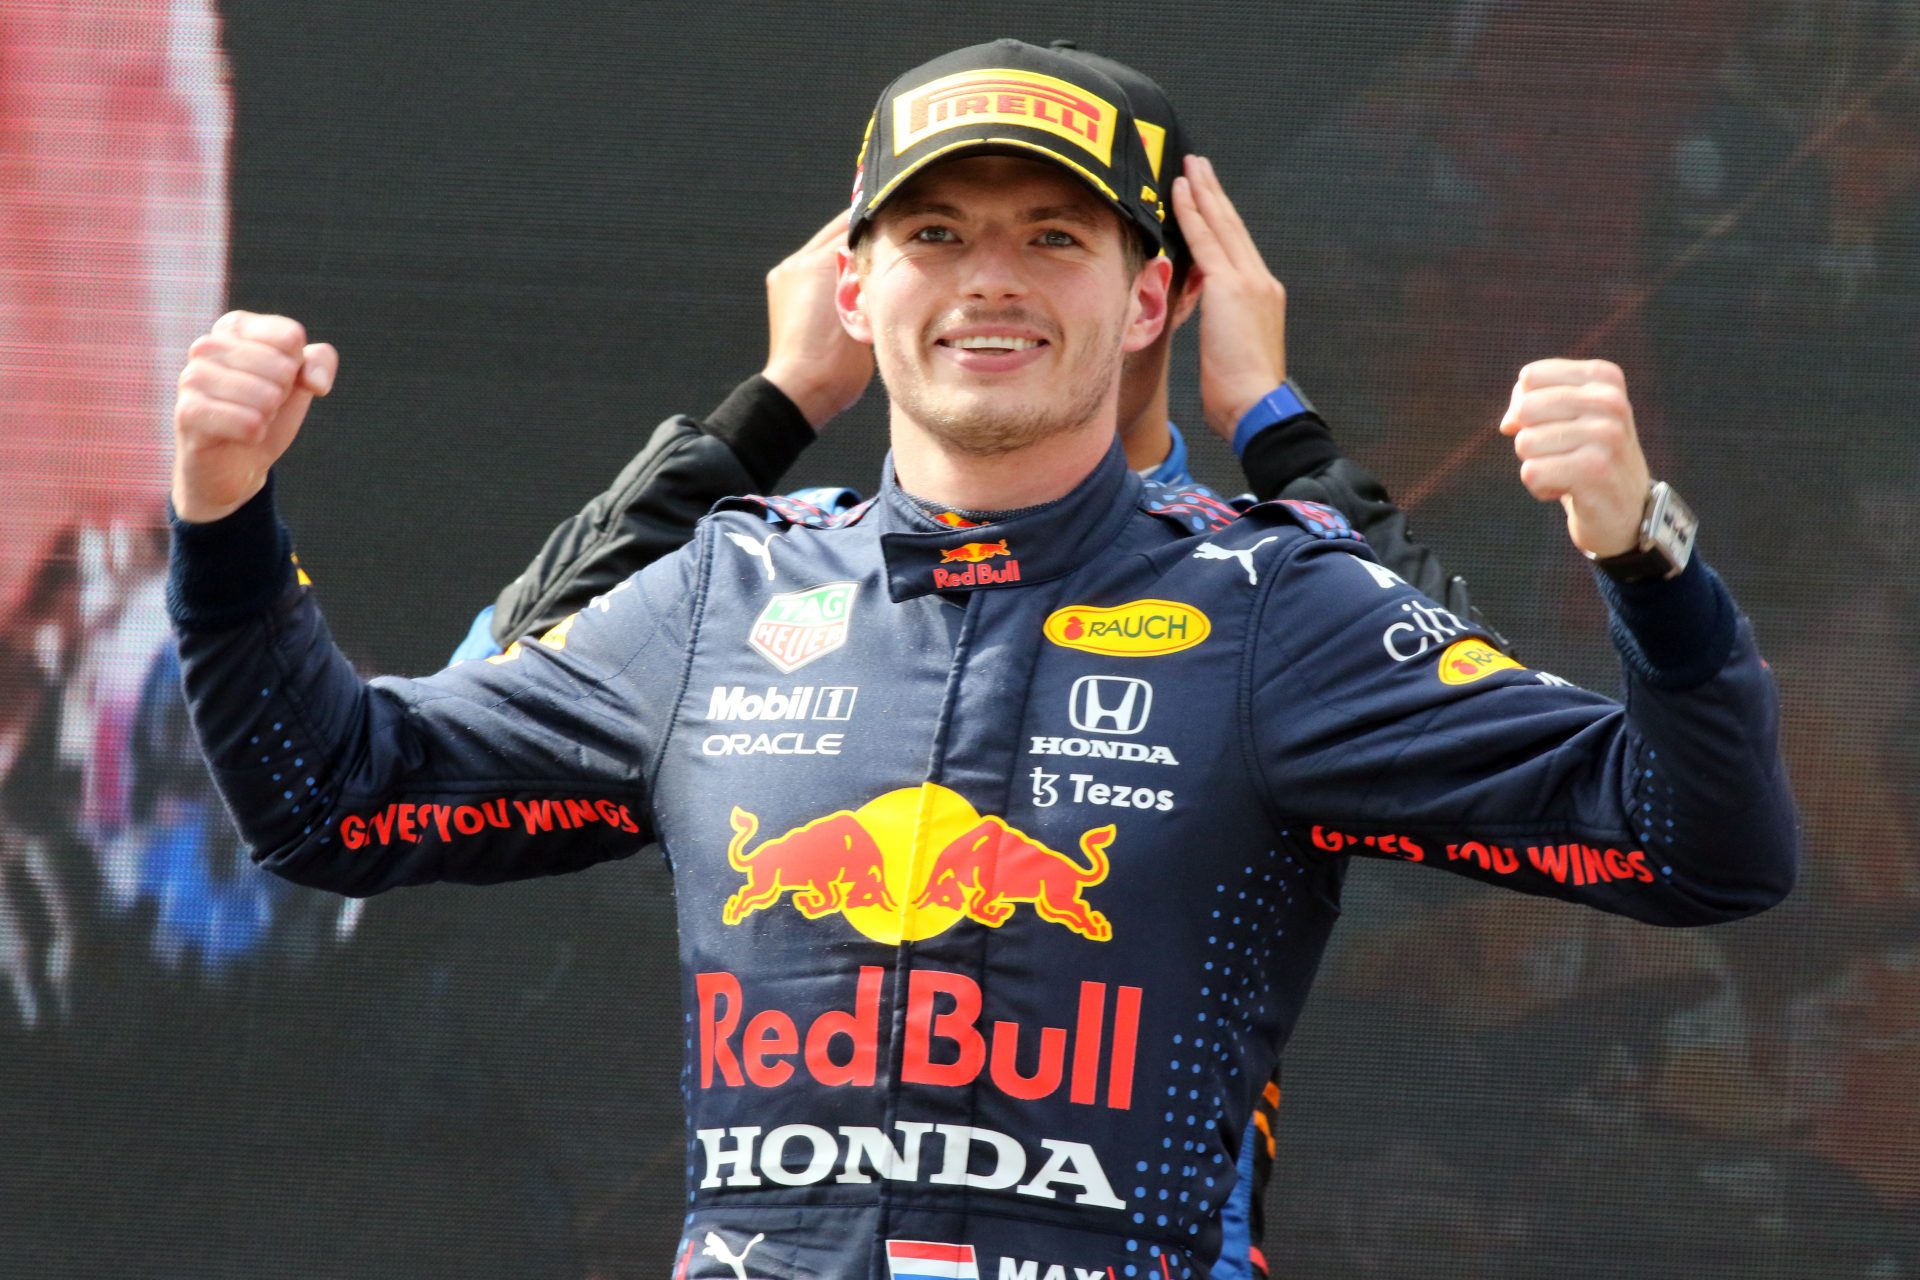 Max Verstappen is the youngest Formula 1 driver to race in a Grand Slam (first start and all laps on the lead)